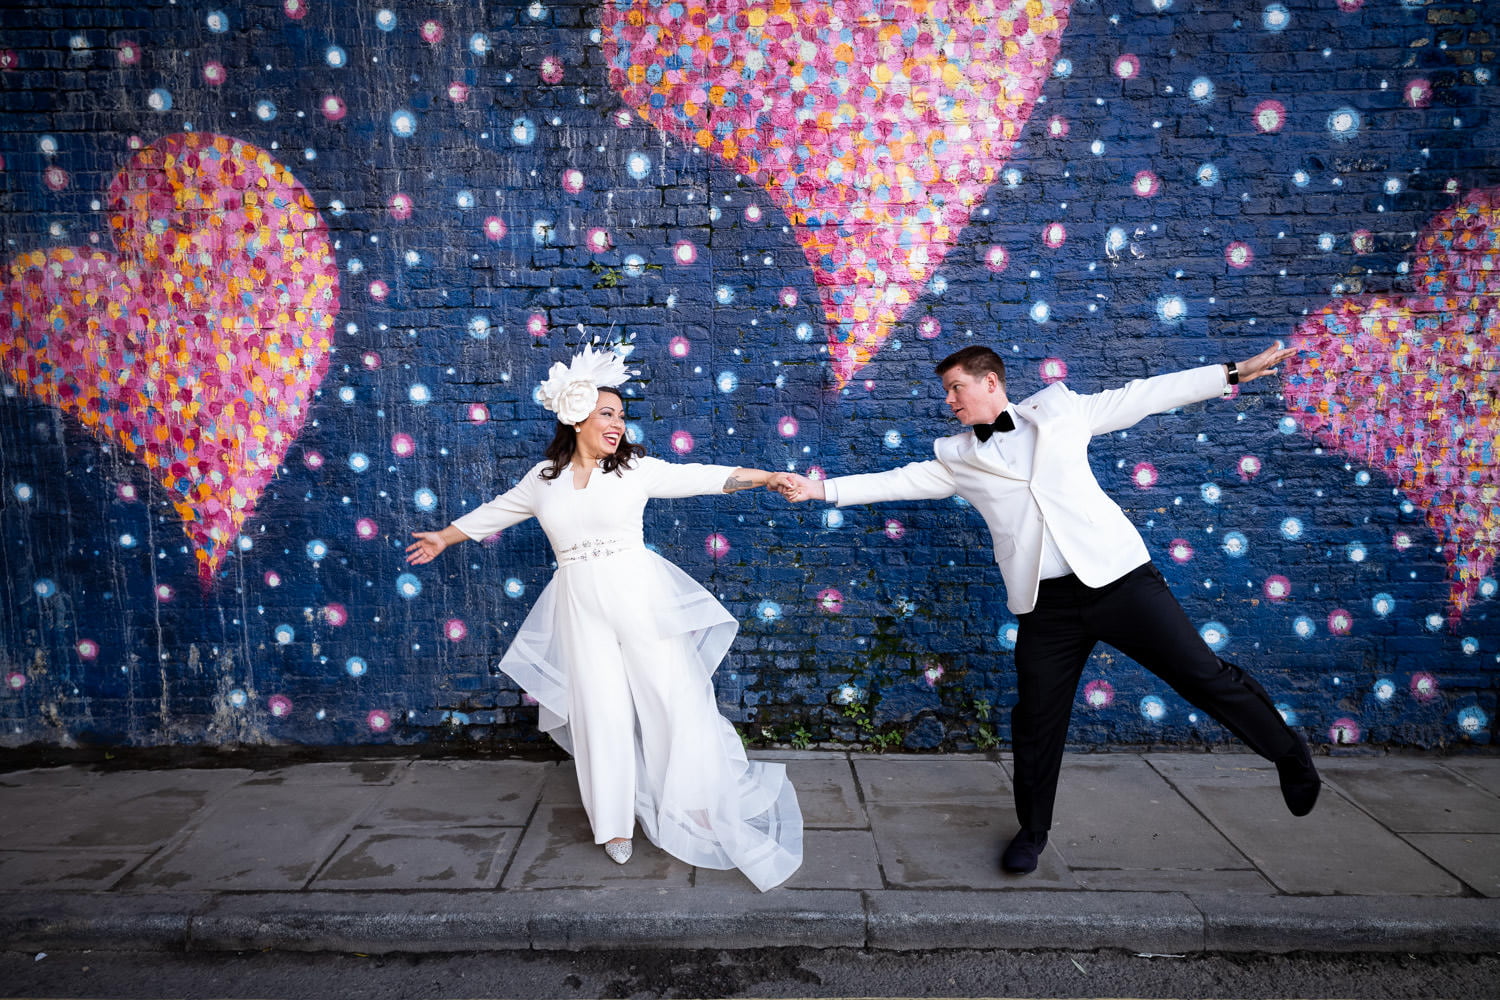 Douglas Fry 2020 Best wedding photographs - London couple during elopement from US